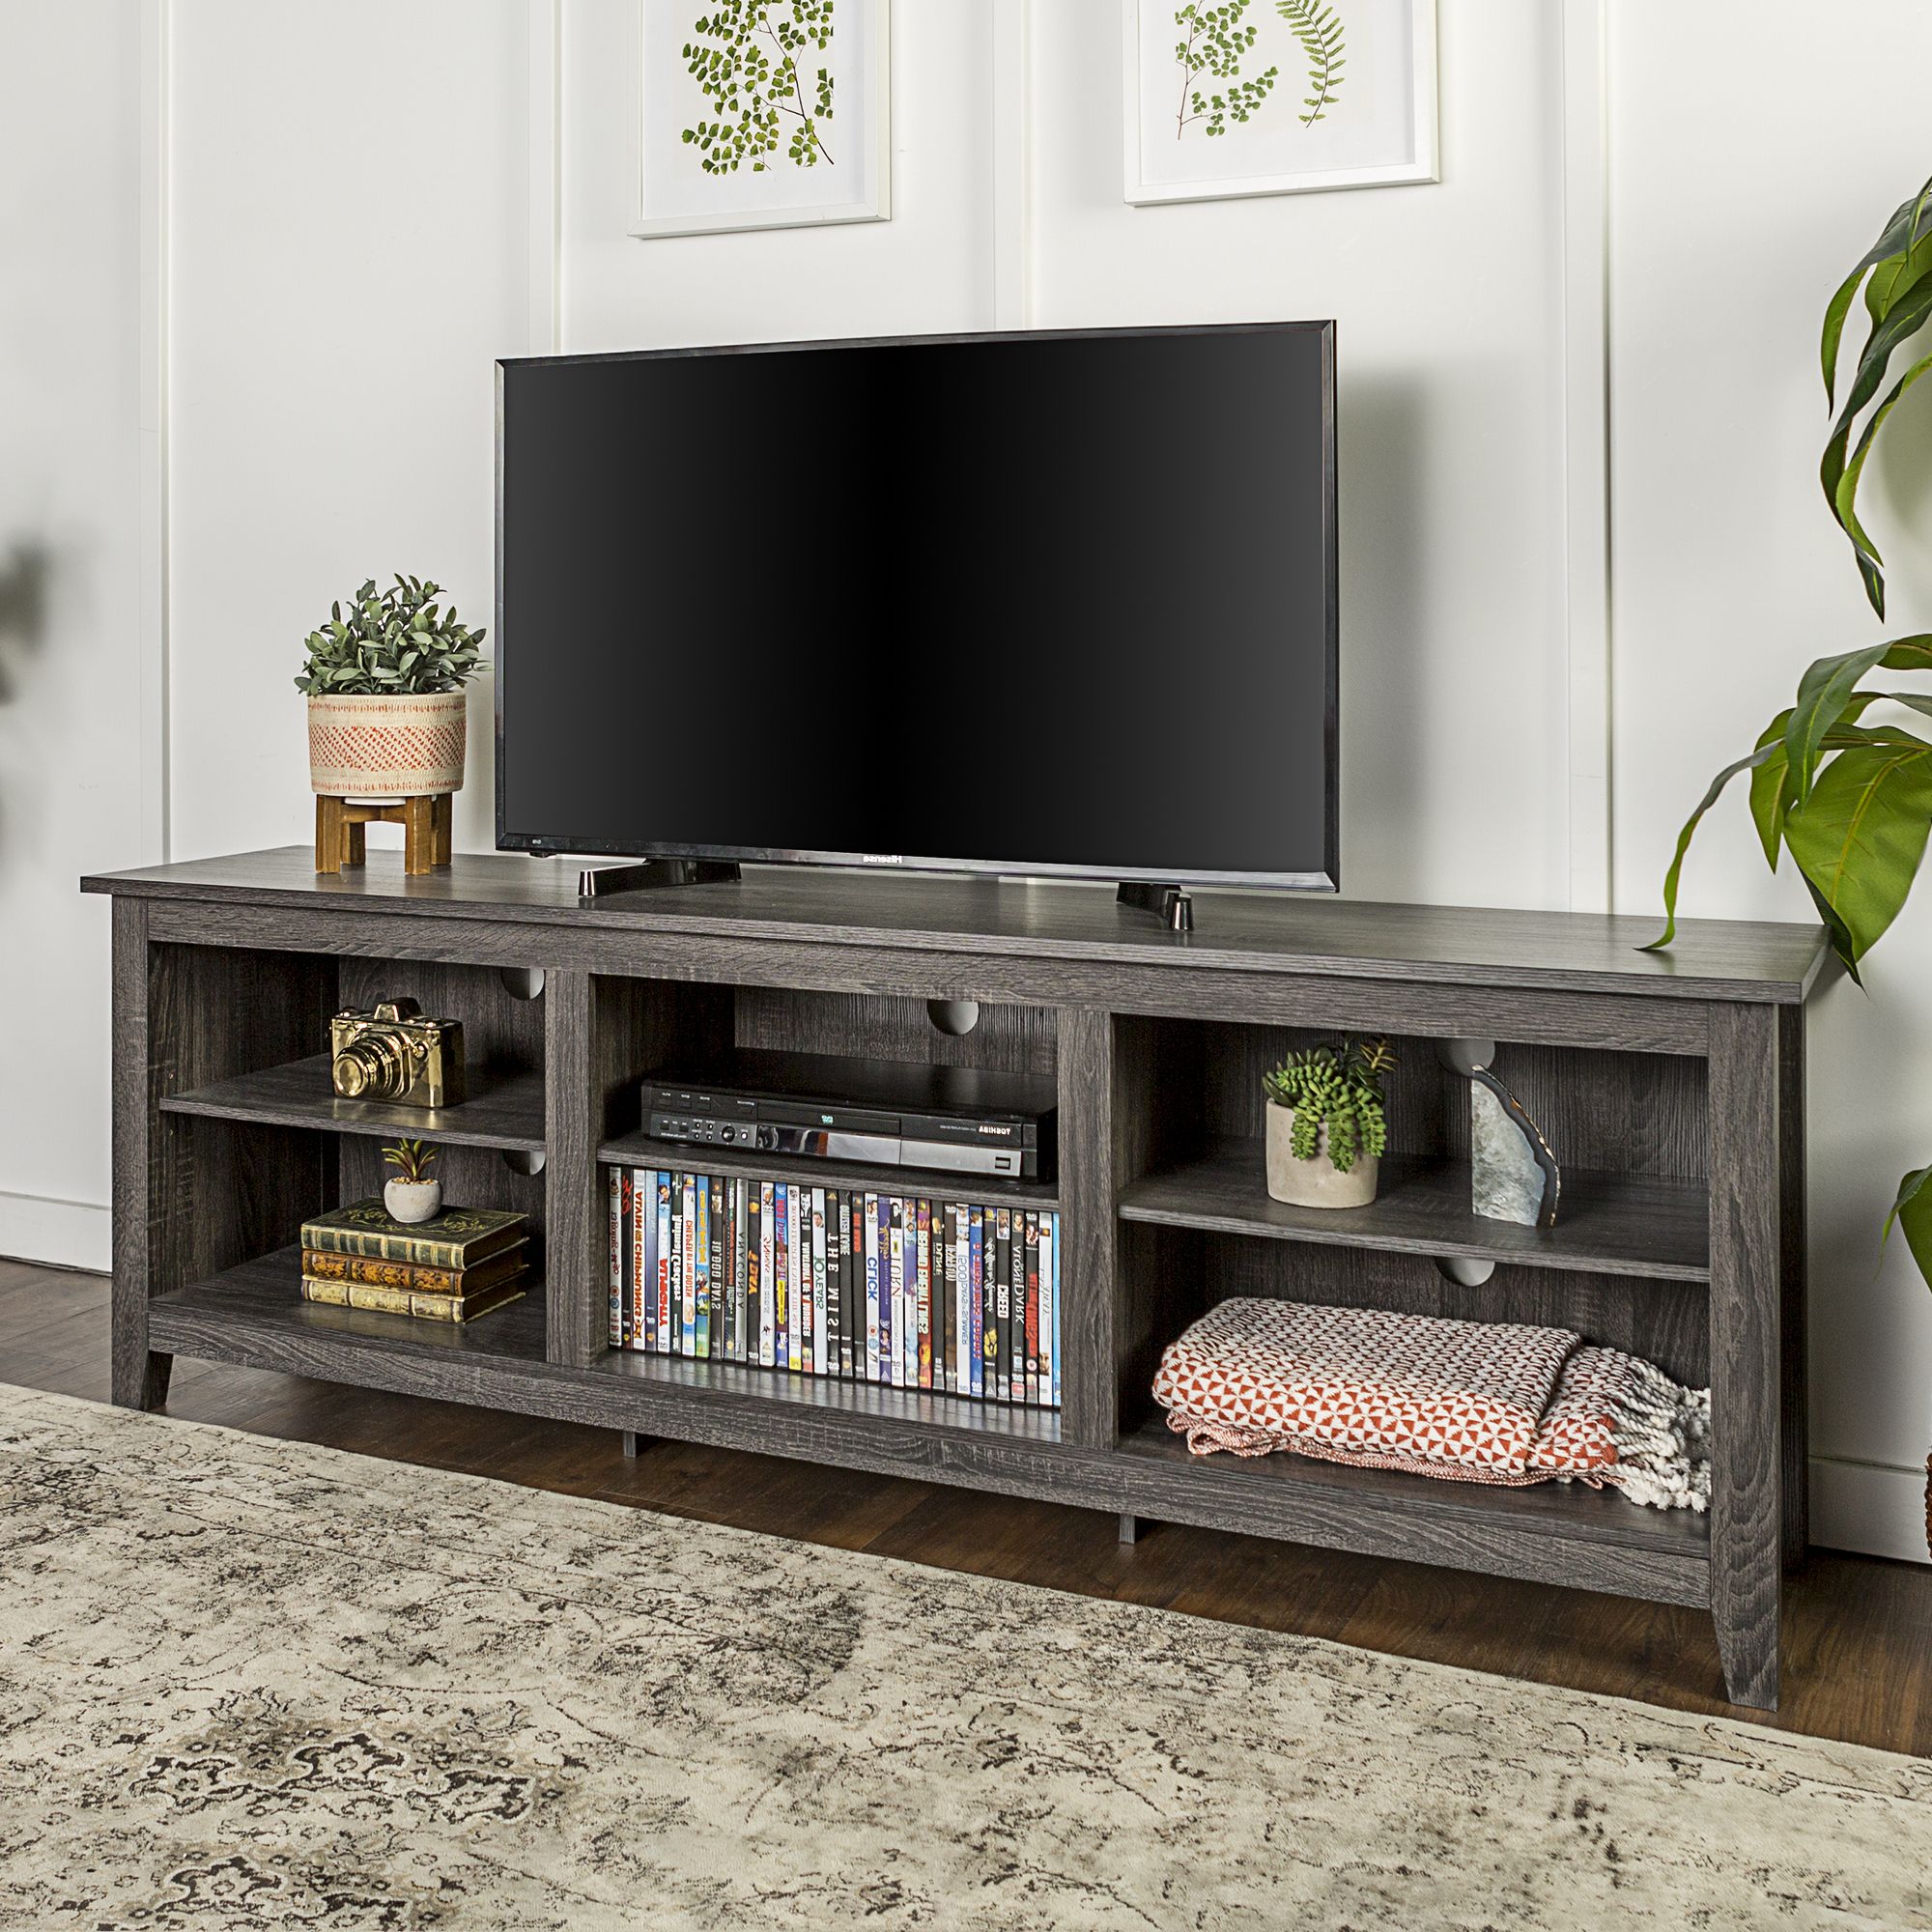 70" Wood Media Tv Stand Storage Console – Charcoal Throughout Tv Stands With Table Storage Cabinet In Rustic Gray Wash (Gallery 1 of 20)